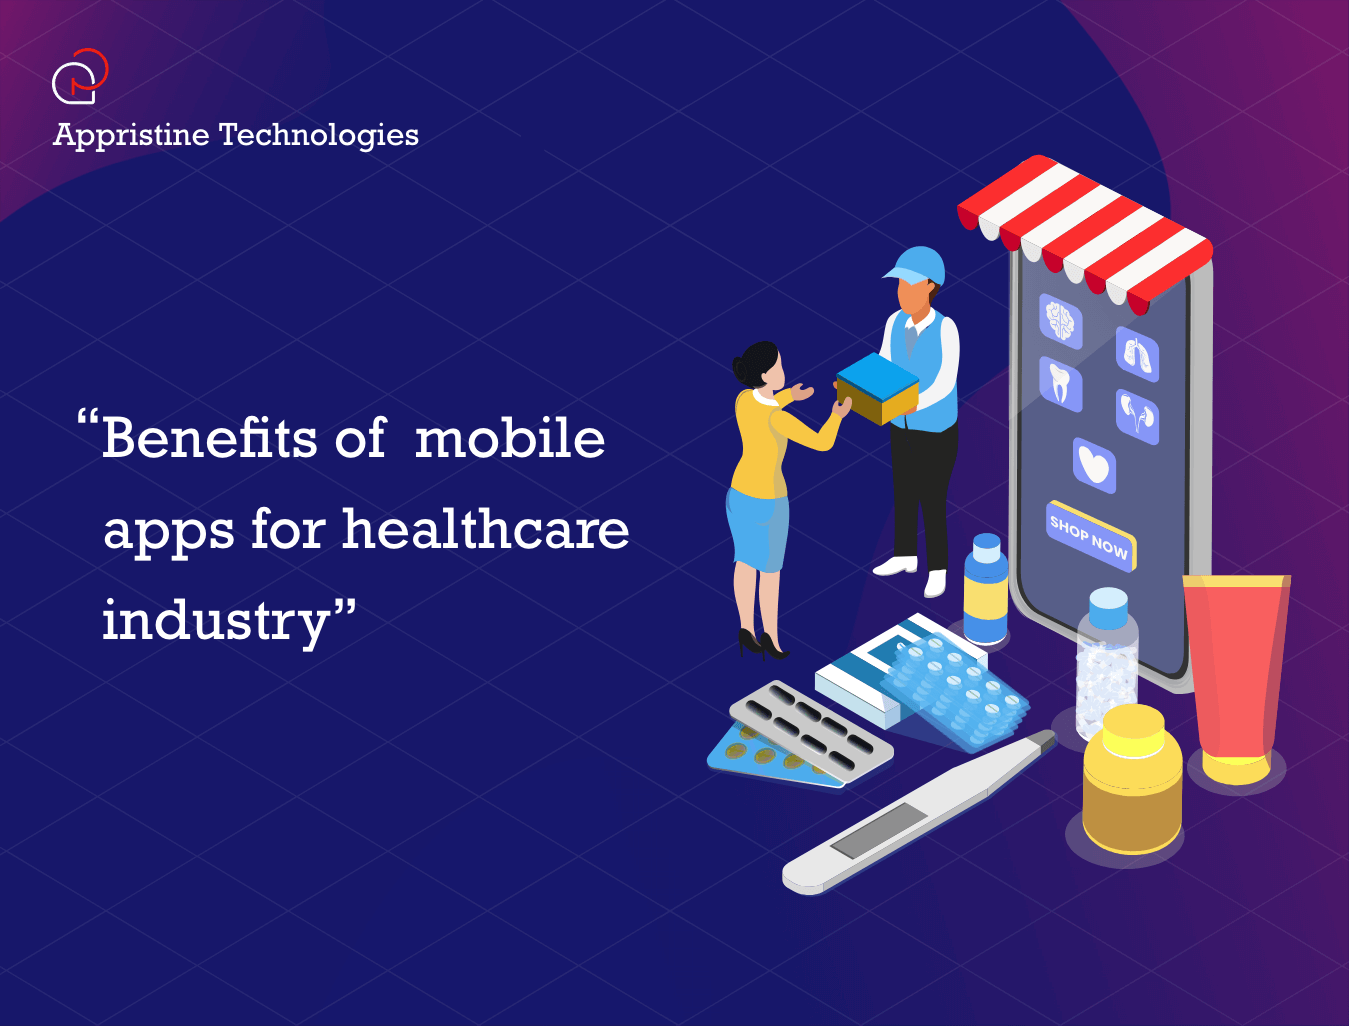 Benefits of mobile apps for healthcare industry